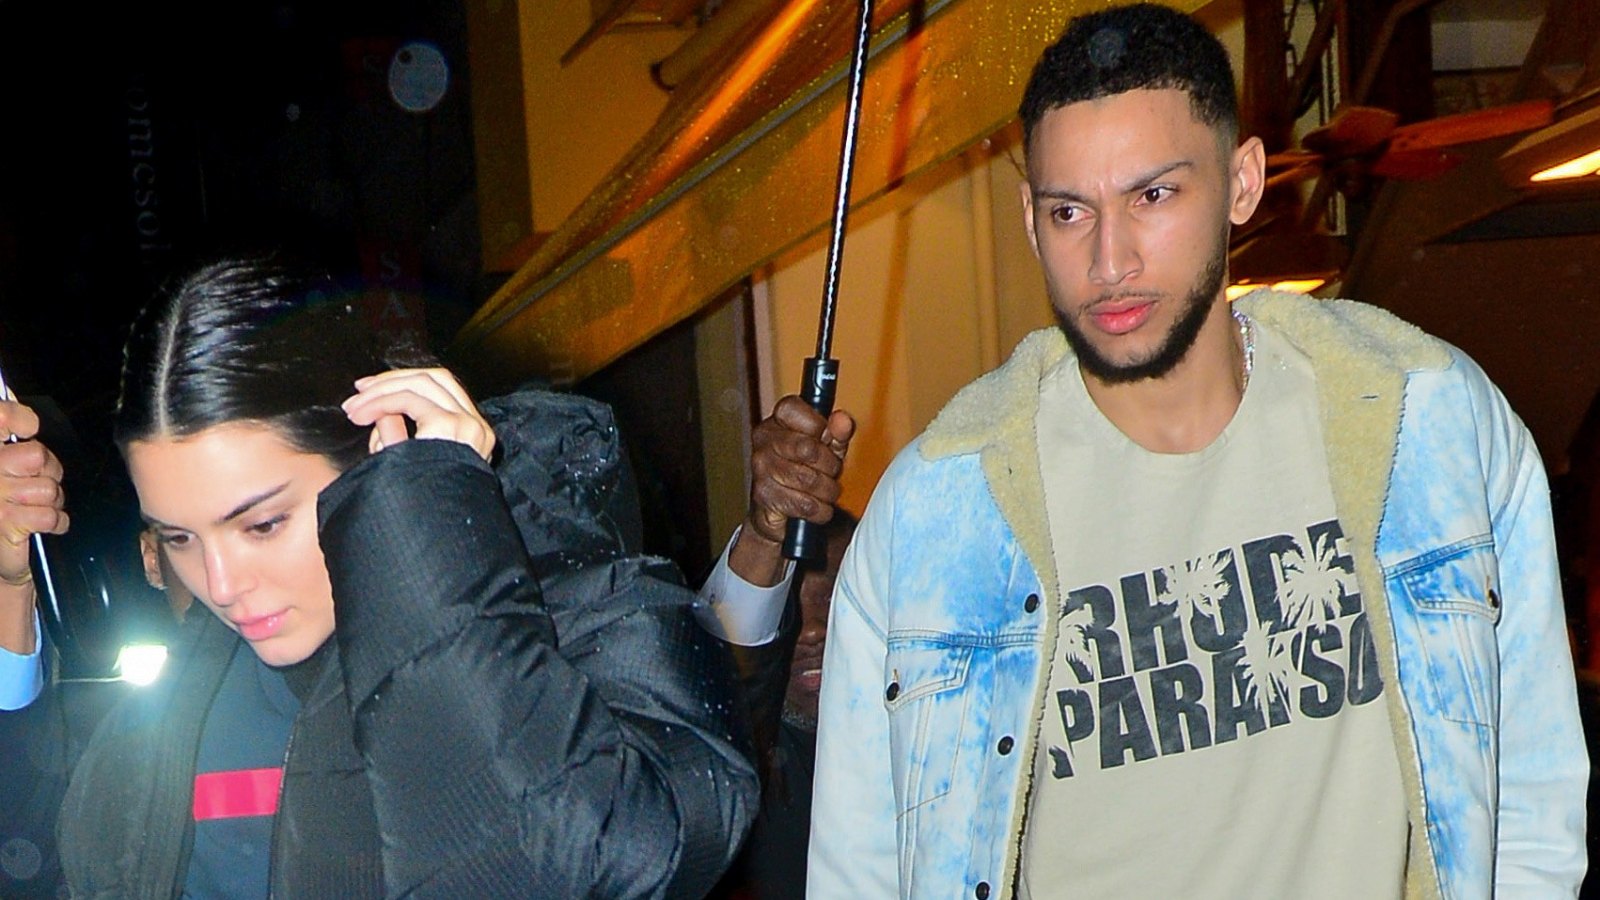 Kendall Jenner pulls in new boyfriend Ben Simmons for a kiss in LA